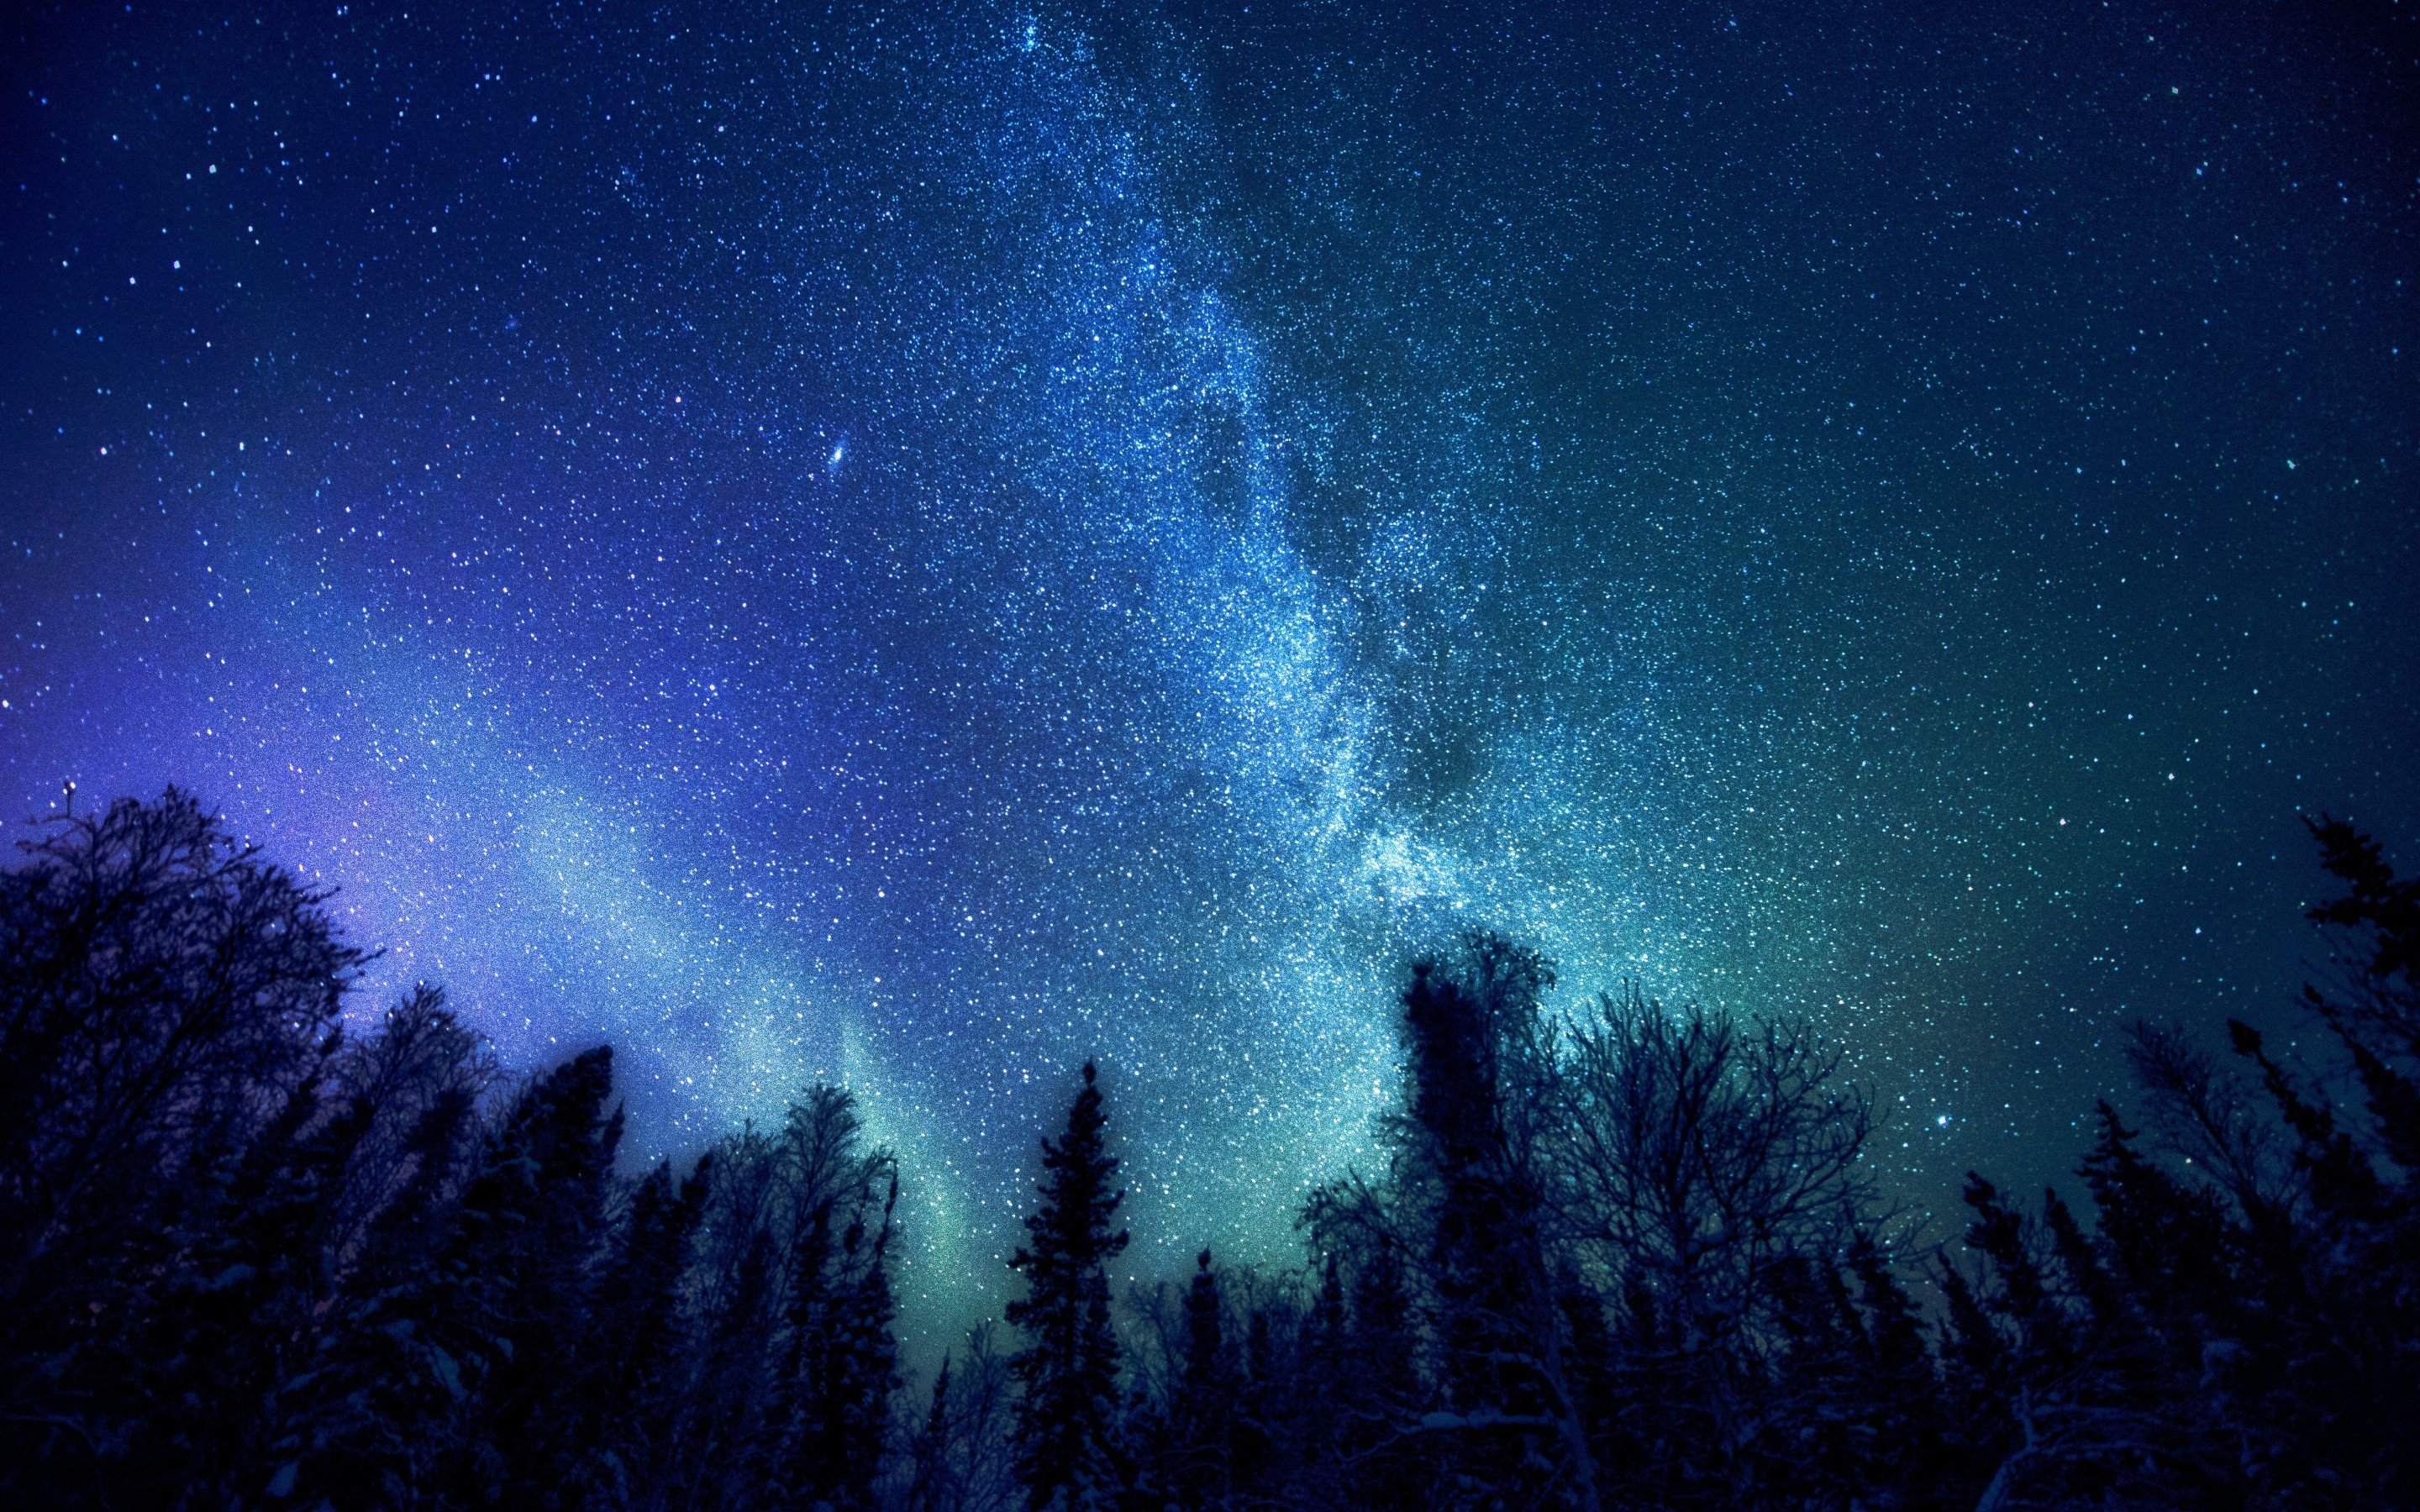 Wallpaper, trees, night, galaxy, nature, sky, stars, Milky Way, atmosphere, astronomy, Aurora, midnight, star, outer space, astronomical object 2880x1800